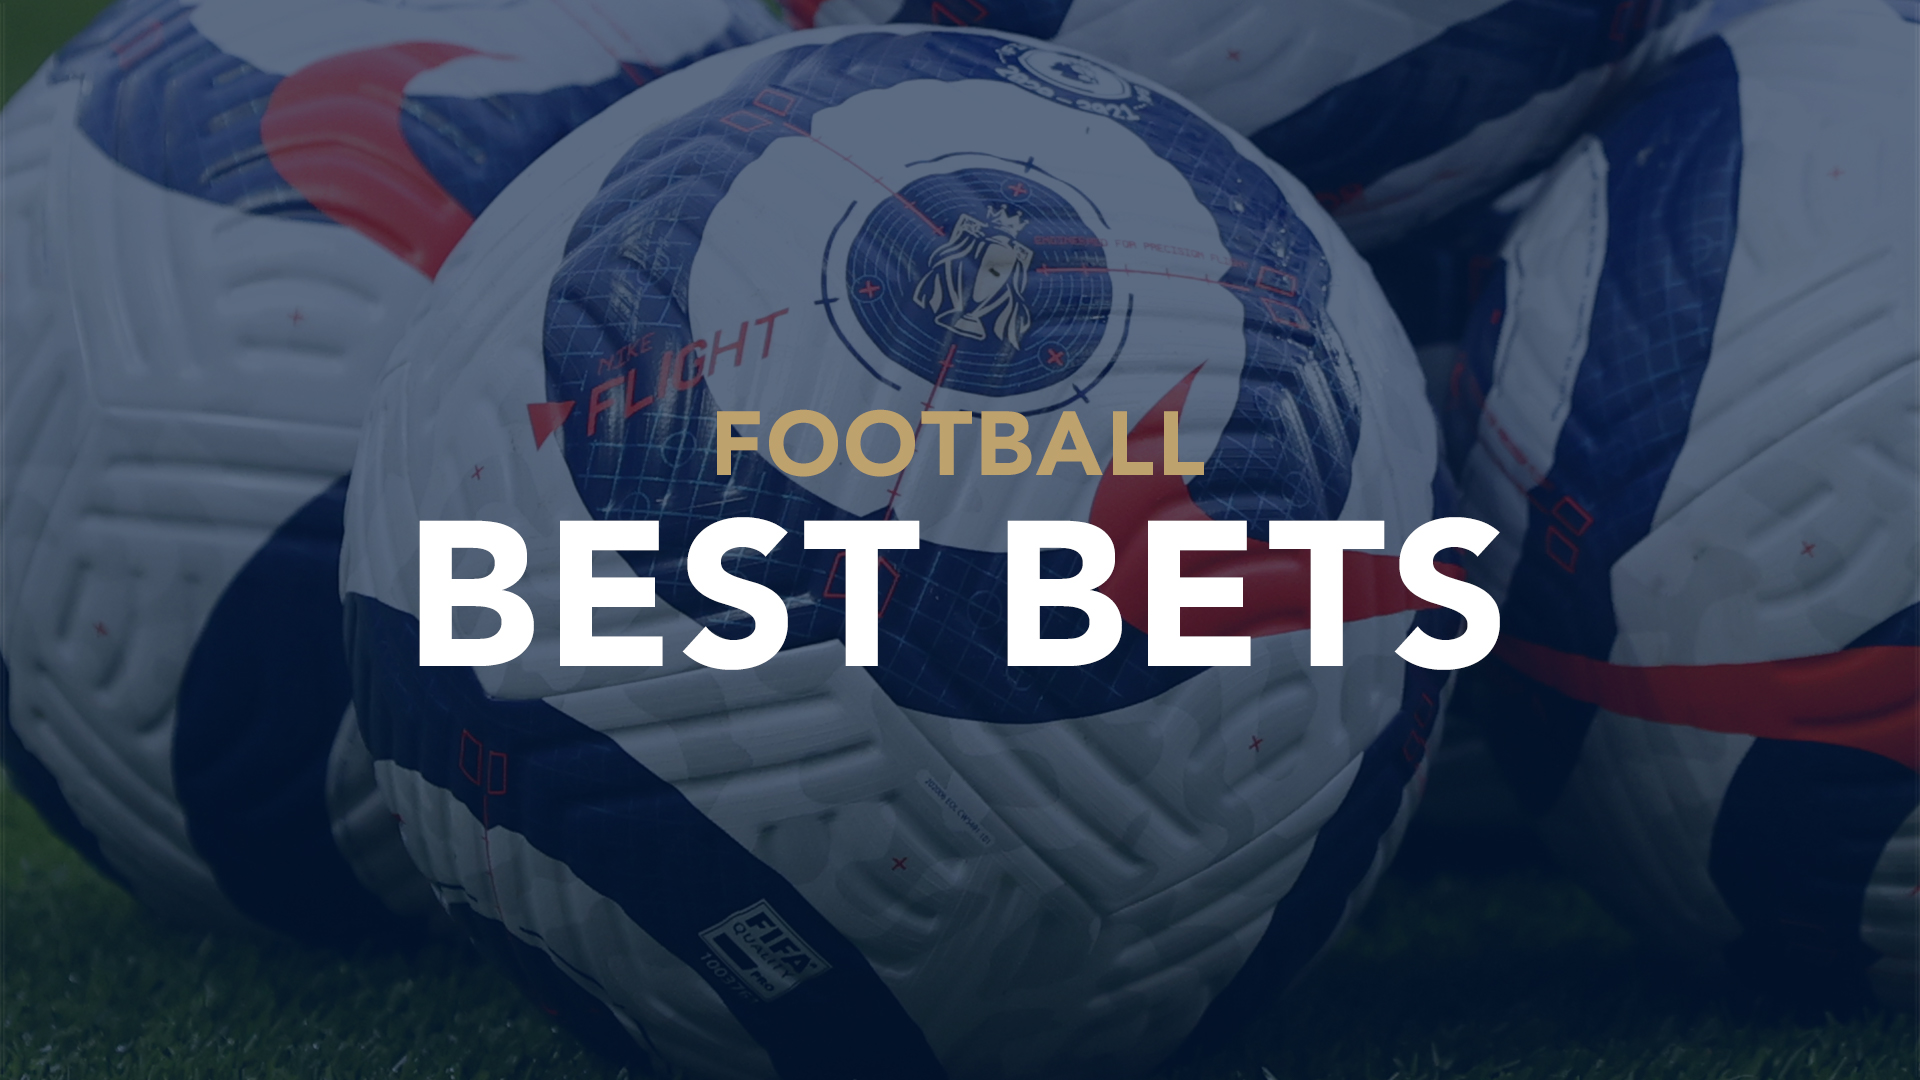 Football betting tips: Best bets for Monday May 31